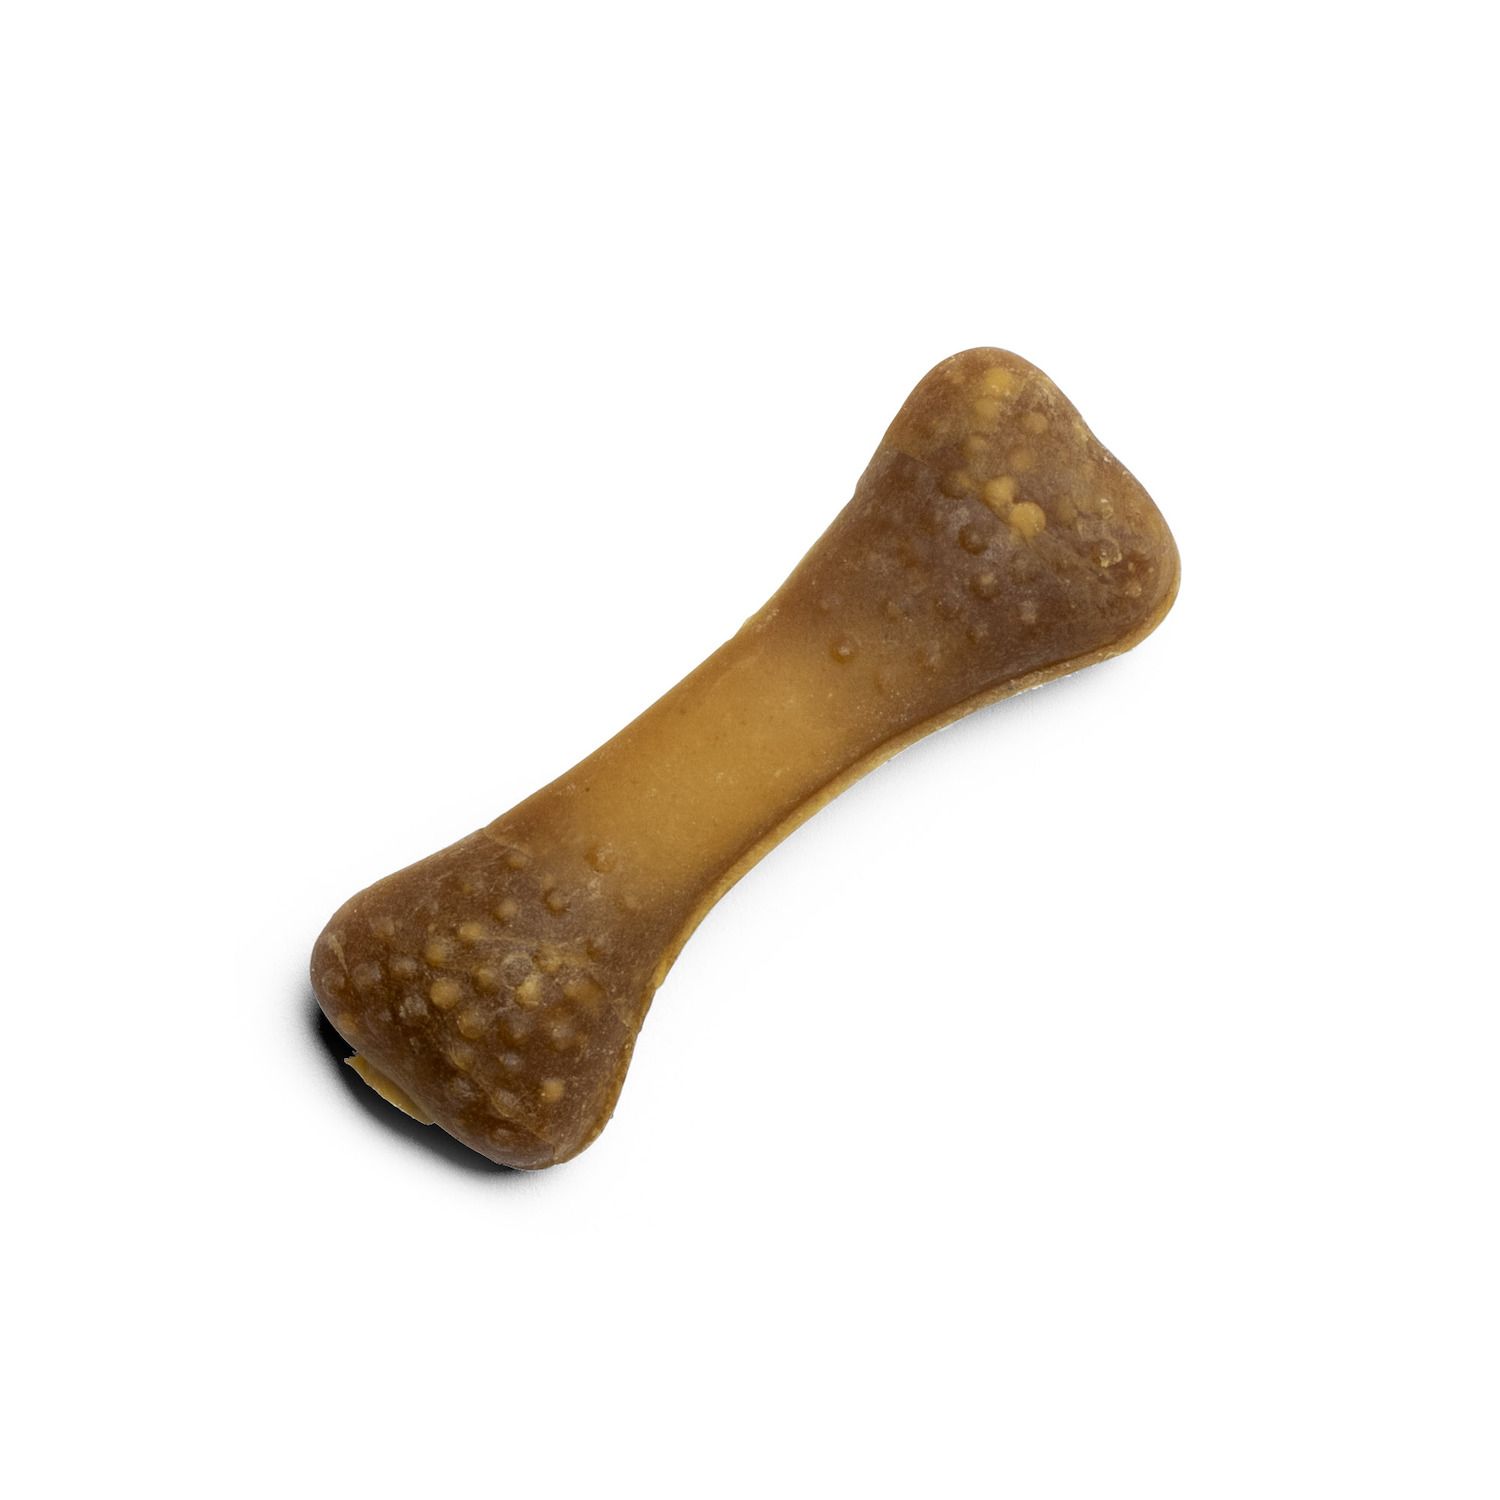 Arm & Hammer: Nubbies TriBone Chew Toy for Dogs Peanut Butter